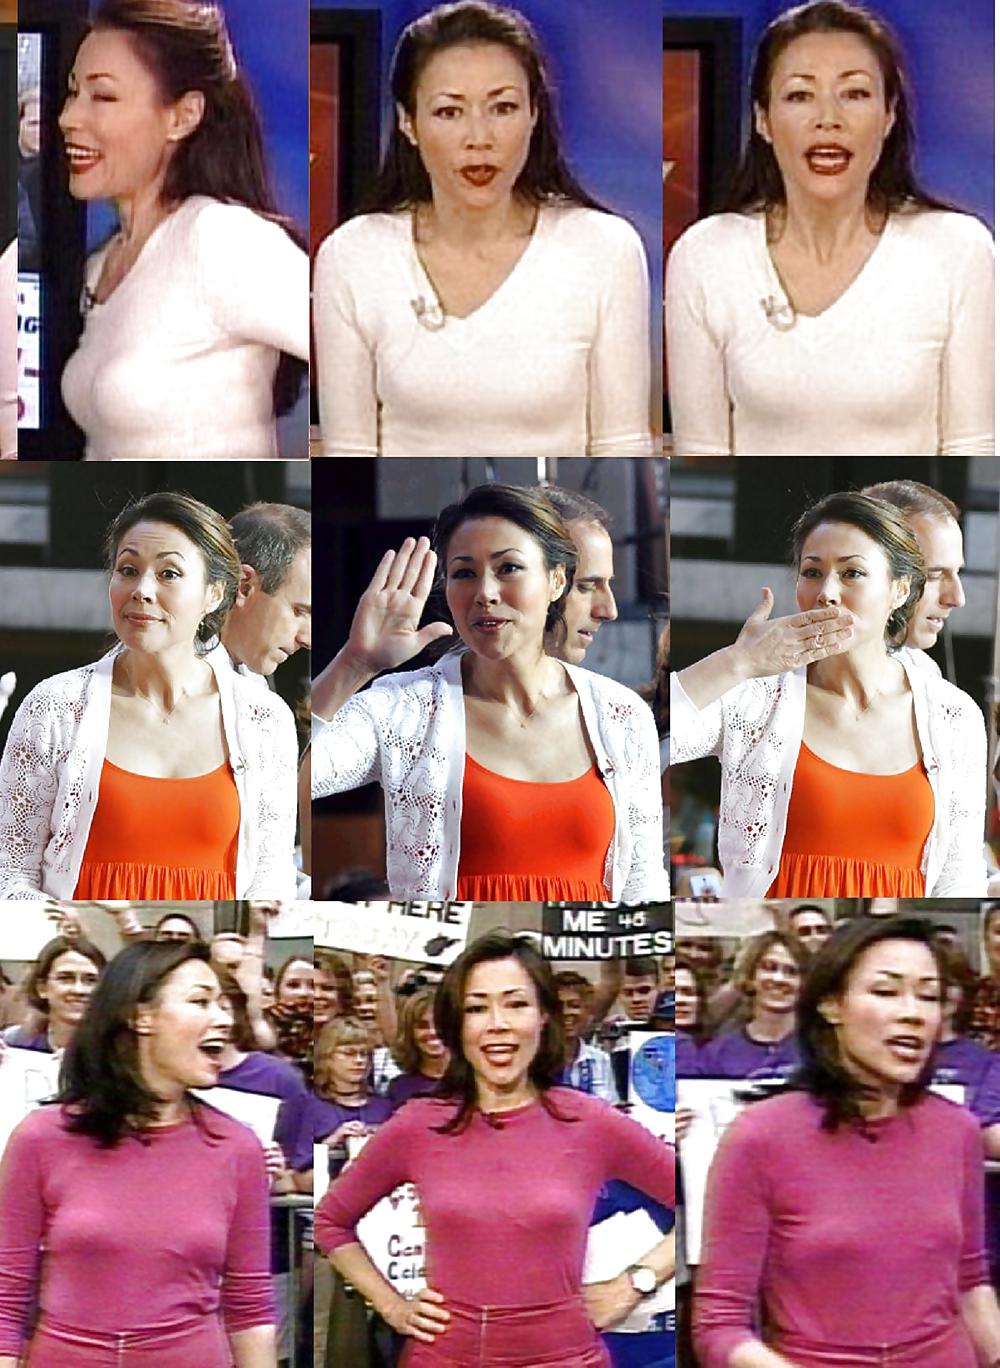 Ann Curry is a very sexual MILF #16376118